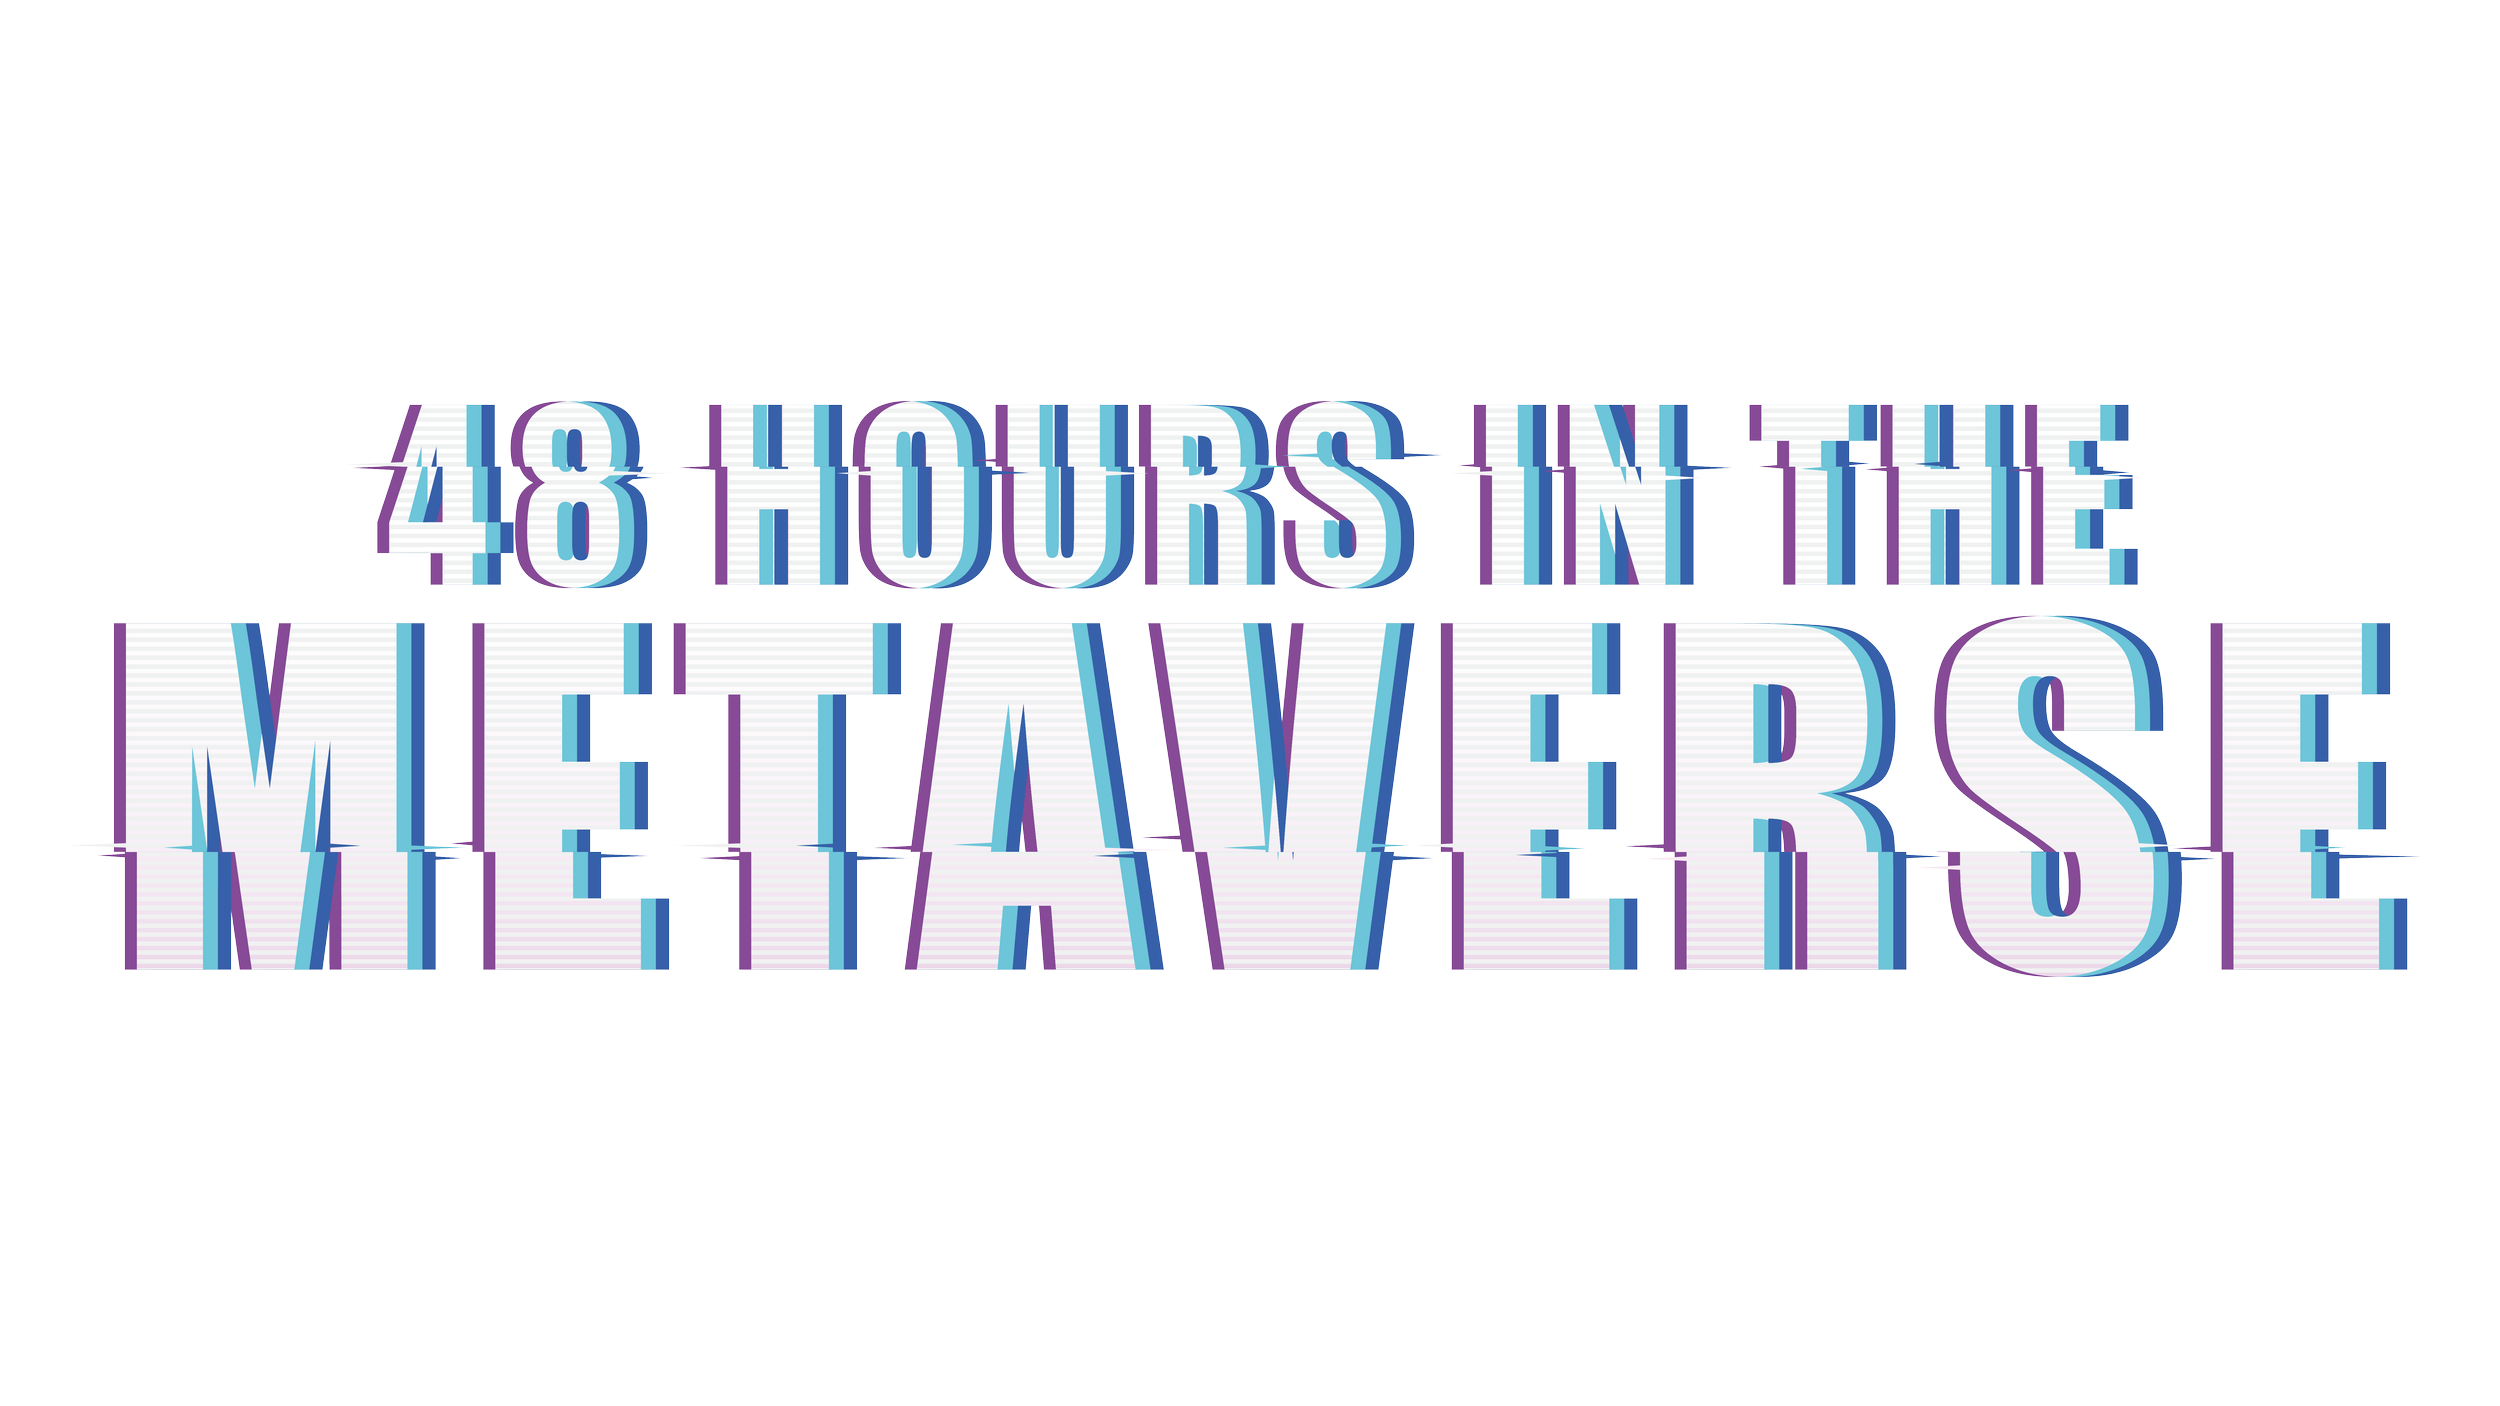 48 Hours in the Metaverse